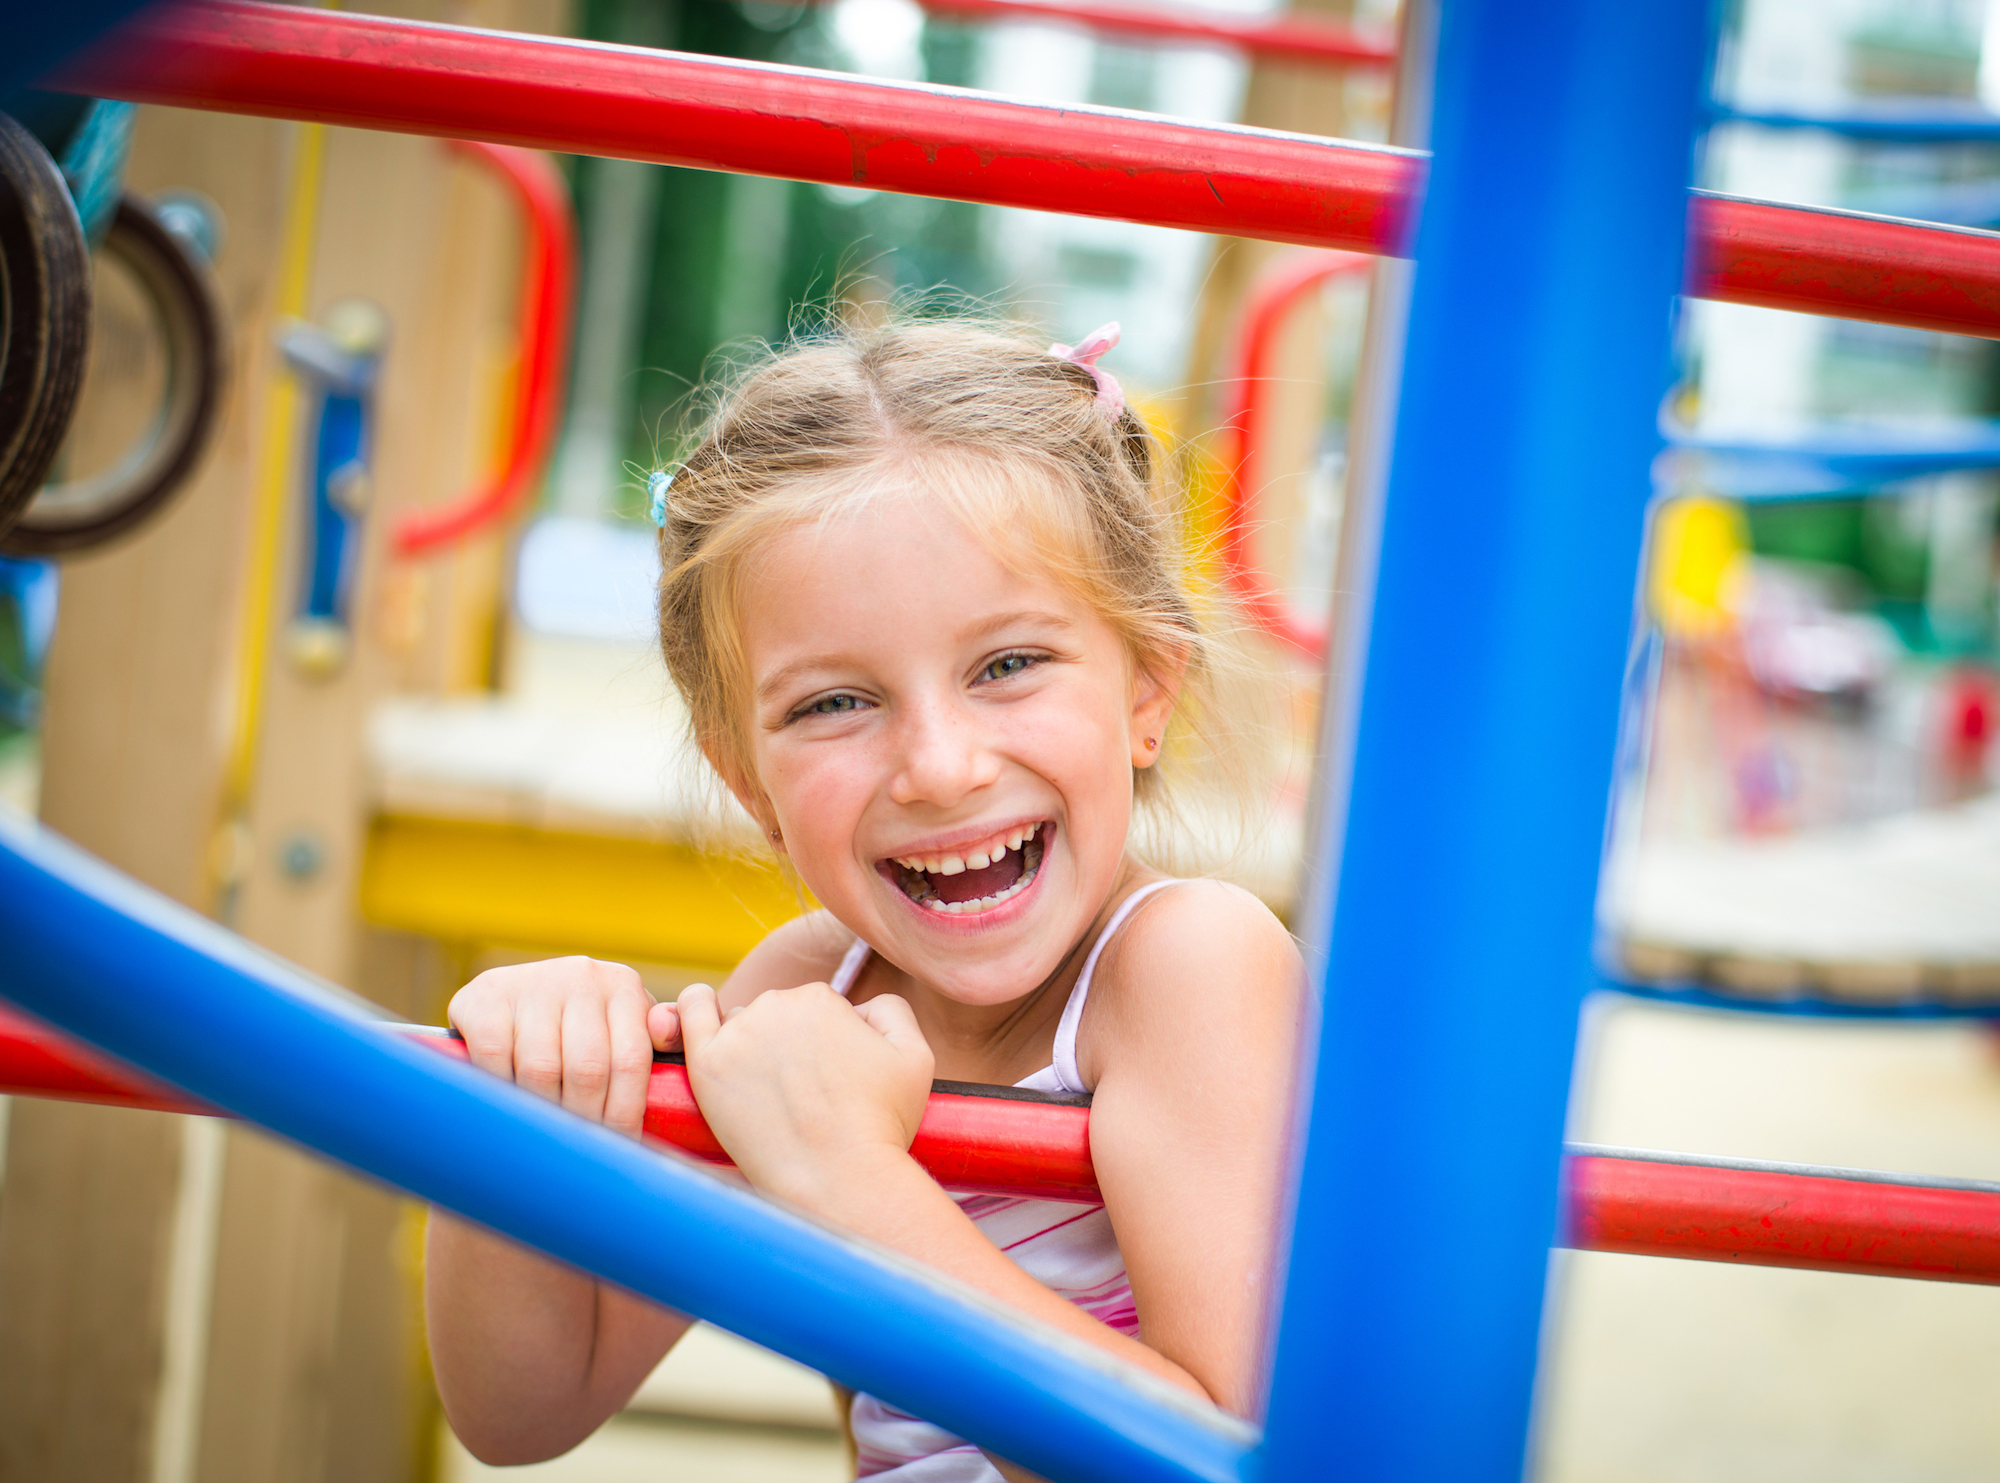 Little girl smiling on playground